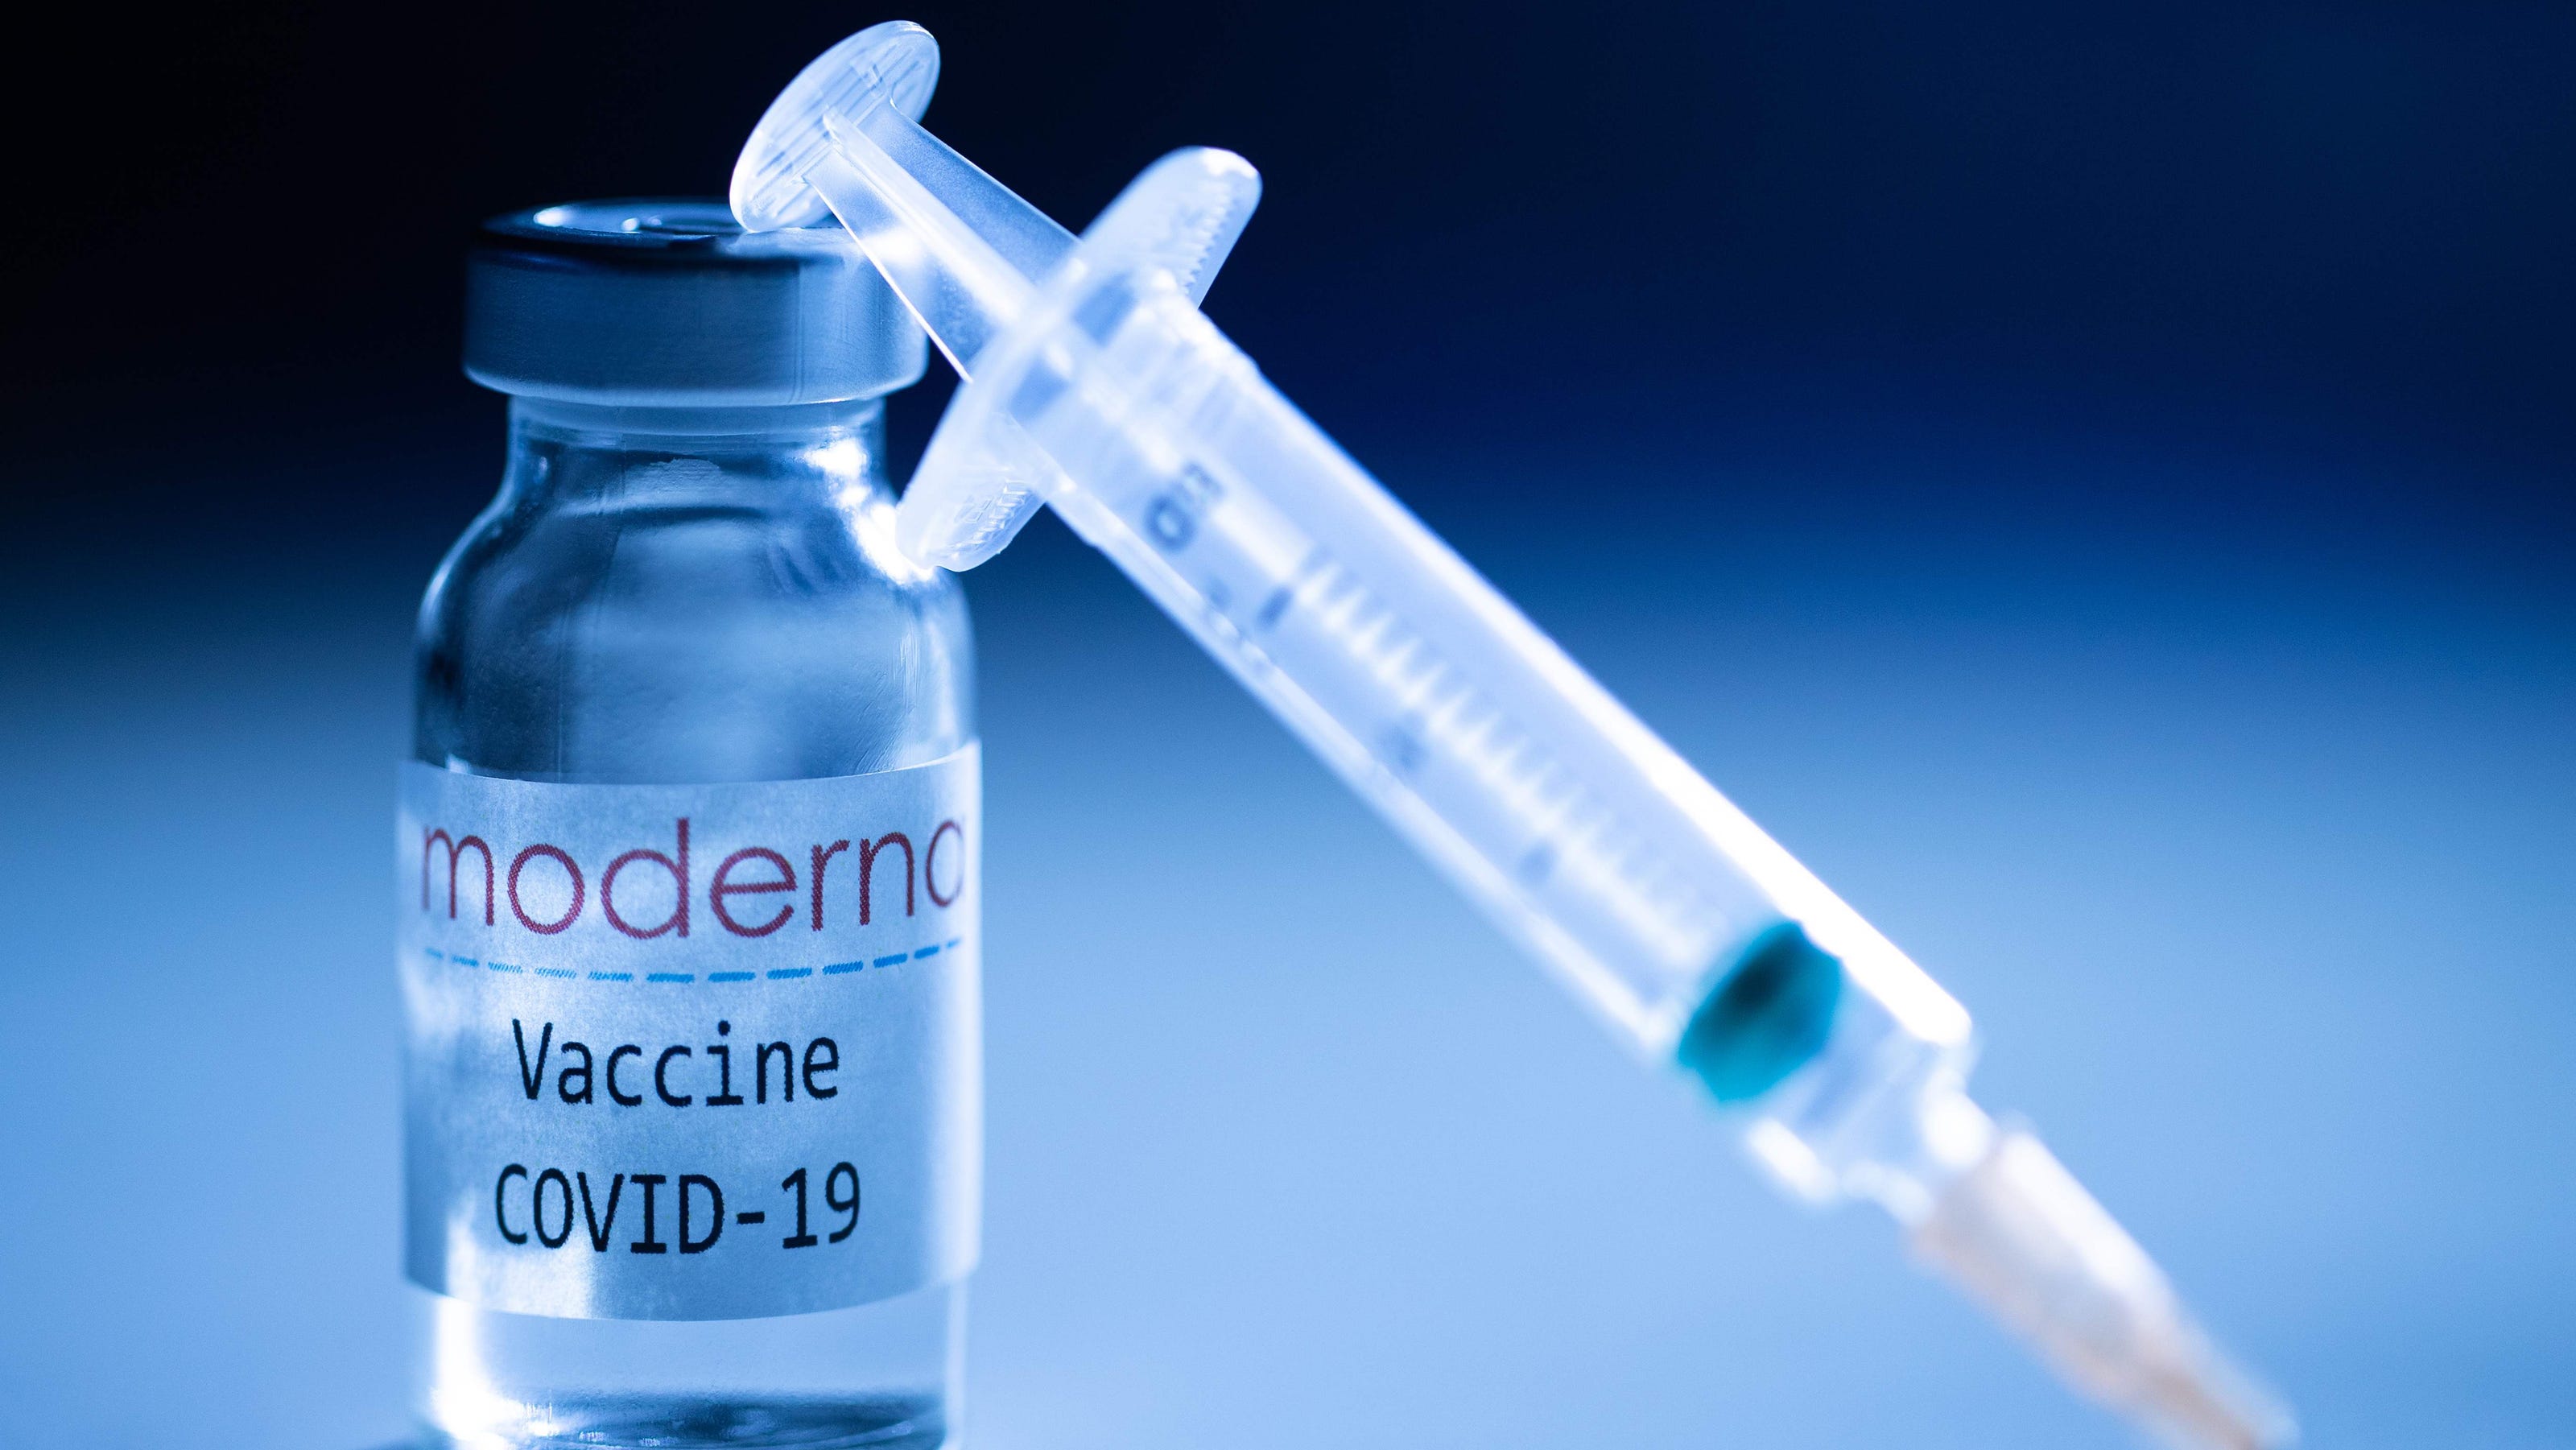 What's the newest Covid vaccine?